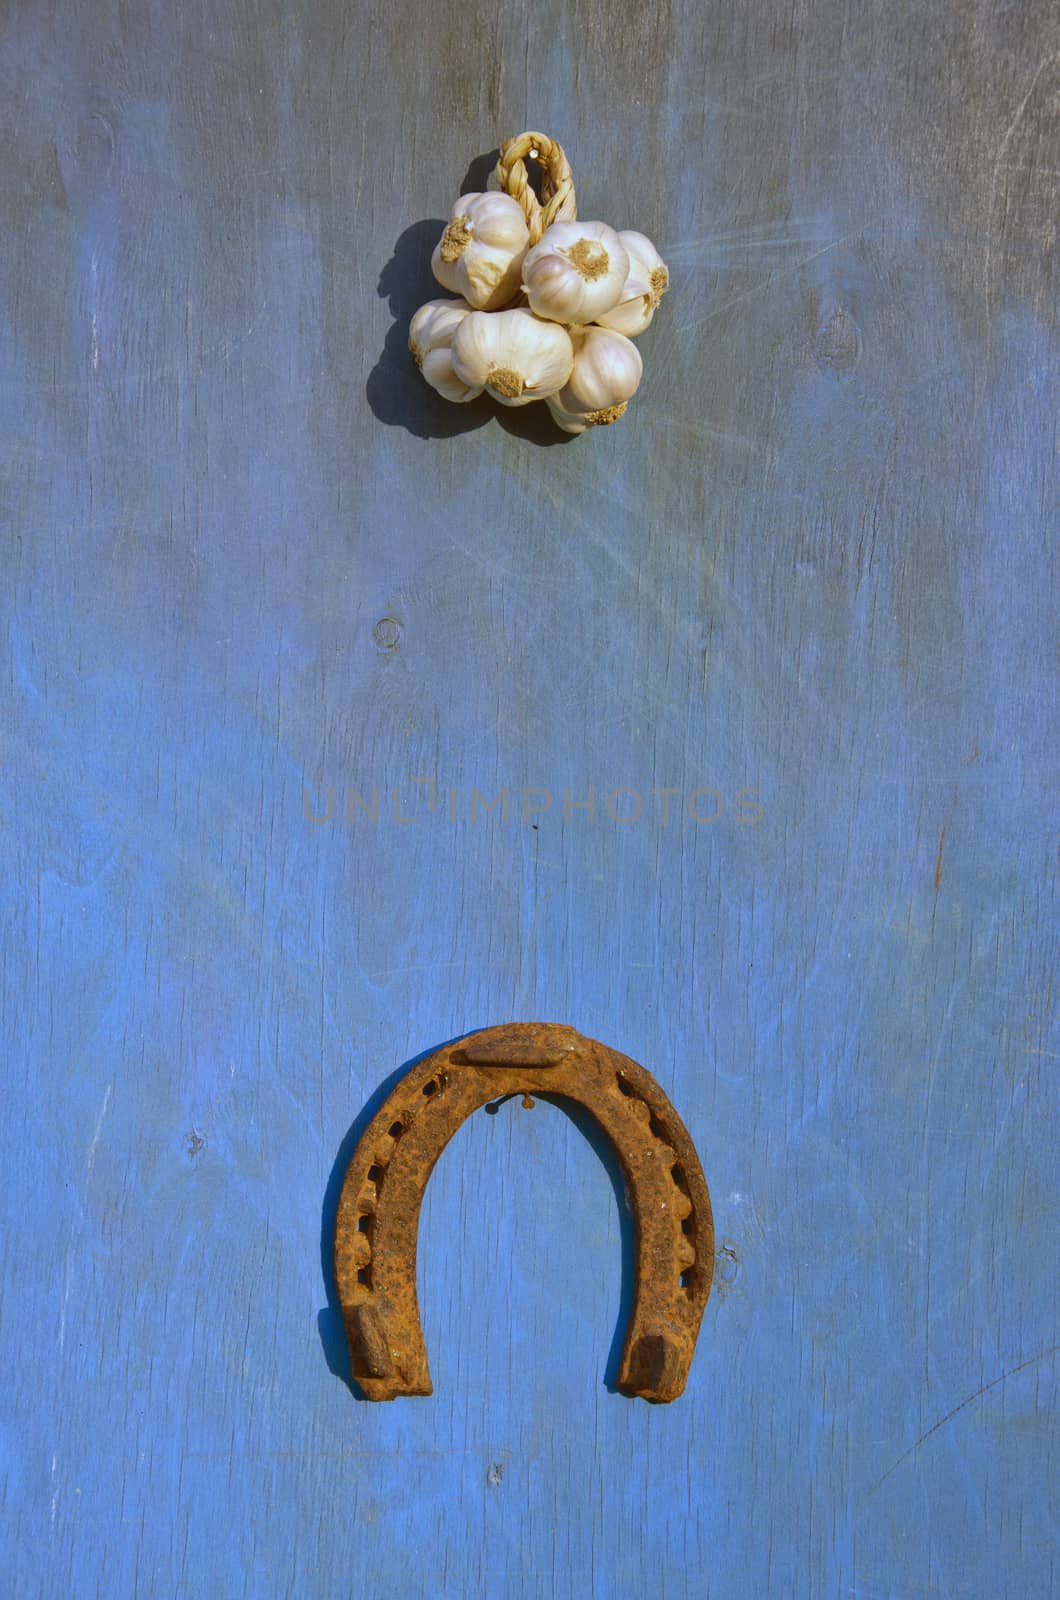 Sunlit bunch of garlic and luck symbol horseshoe on blue wooden background